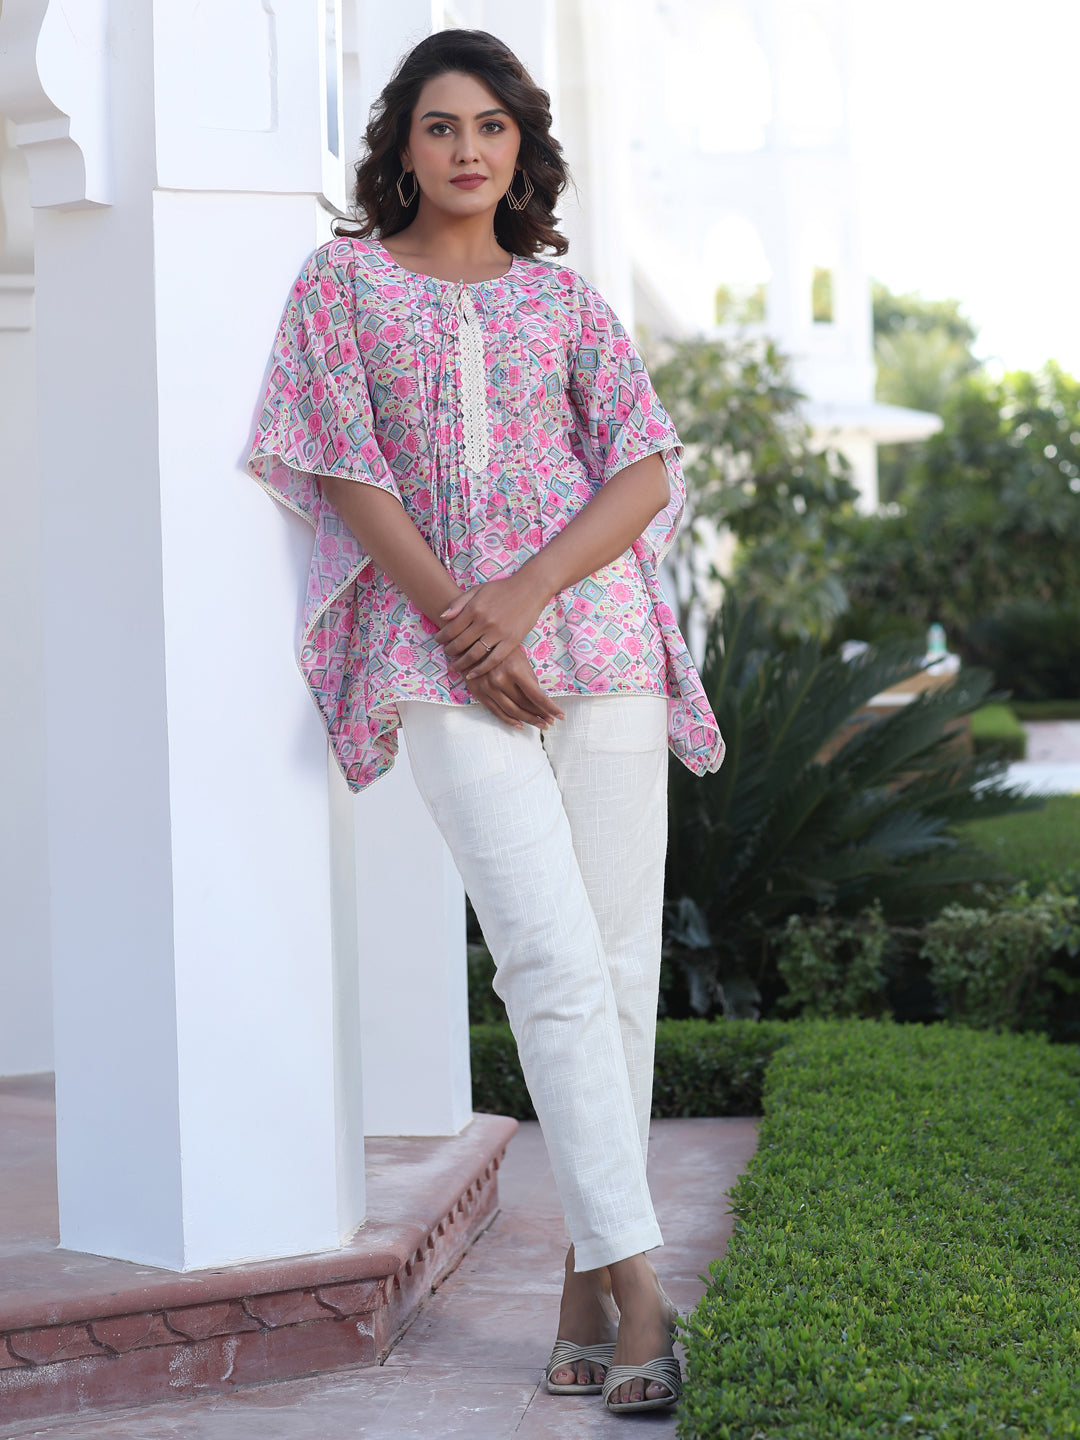 A Pink Geometric Printed Georgette Kaftan Top With Pintucks And Lace Details At The Yoke